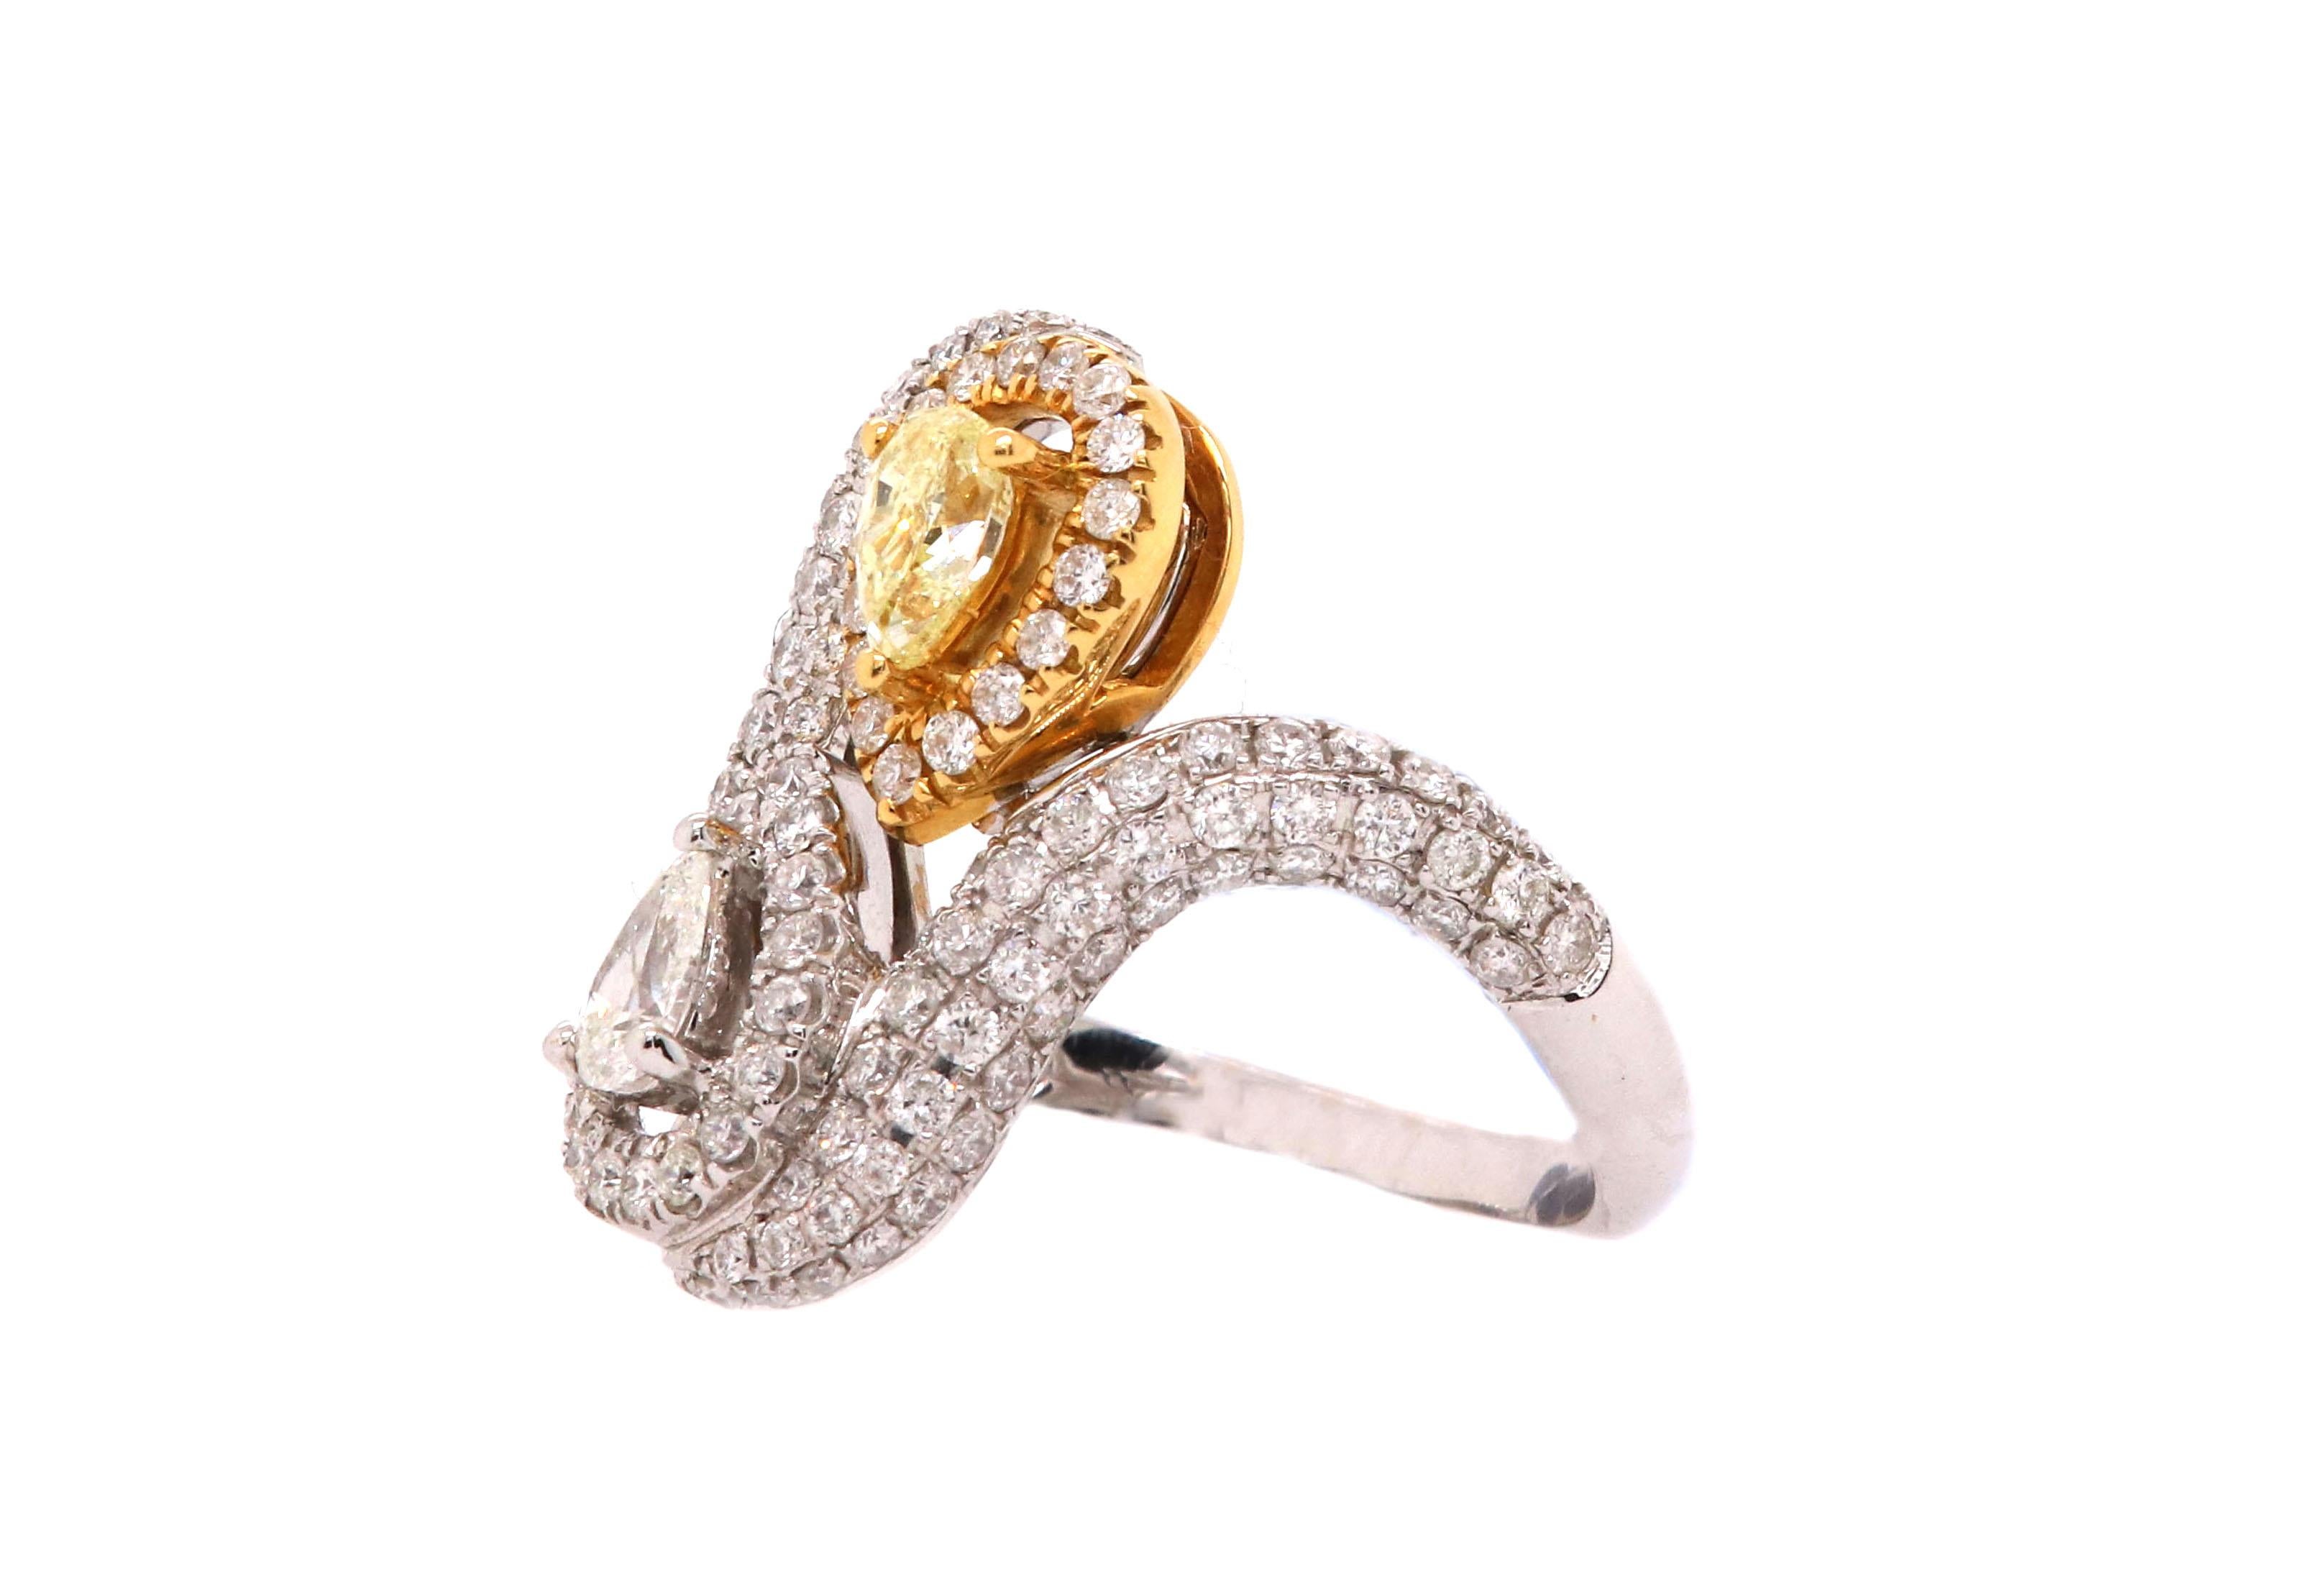 Material: 18k Two Tone Gold
Center Stone Details:  1 Pear Shaped Yellow Diamond at 0.36 Carats
Mounting Diamond Details: 1 Pear Shaped White Diamond at 0.22 Carats
Diamond Details: 130 Brilliant Round White Diamonds as 1.03 carats SI Clarity/H-I